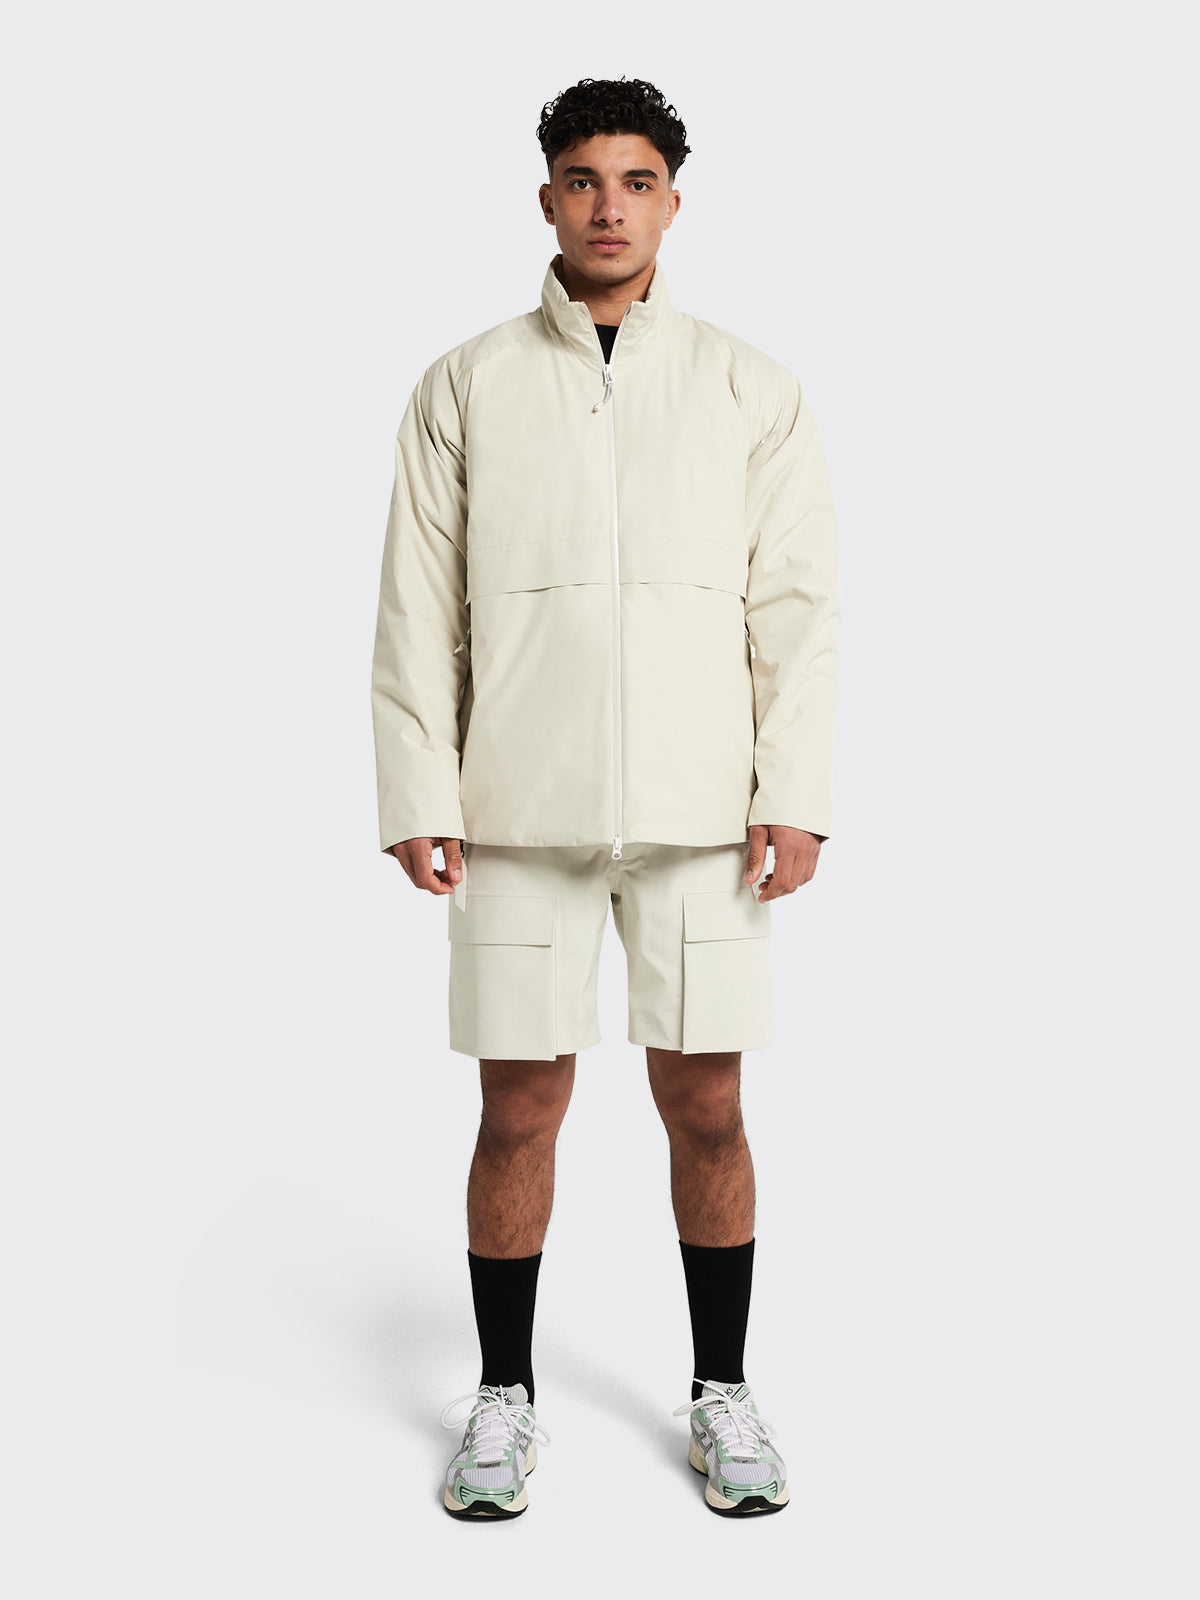 Man wearing Flø RS jacket from Blæst in the color Birch